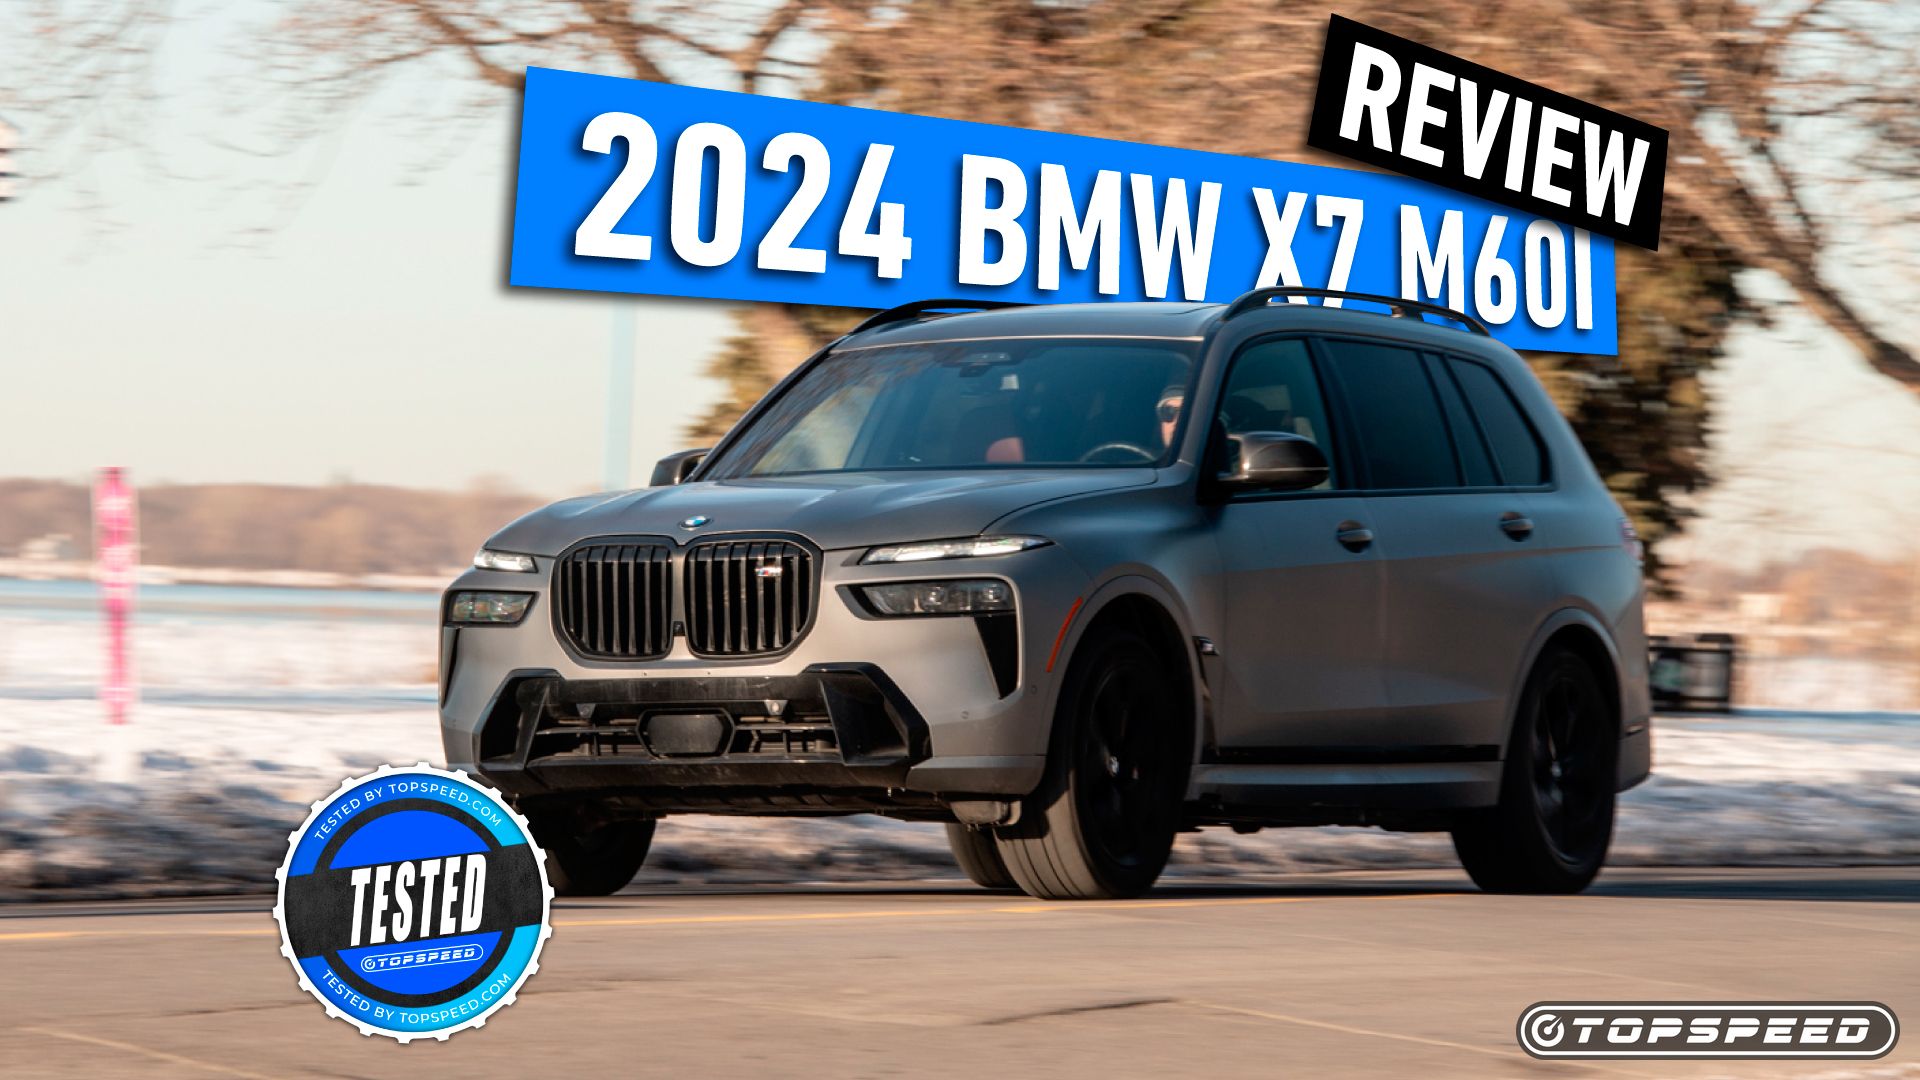 Tested: The Massive 2024 BMW X7 M60i Has No Right To Perform The Way It Does